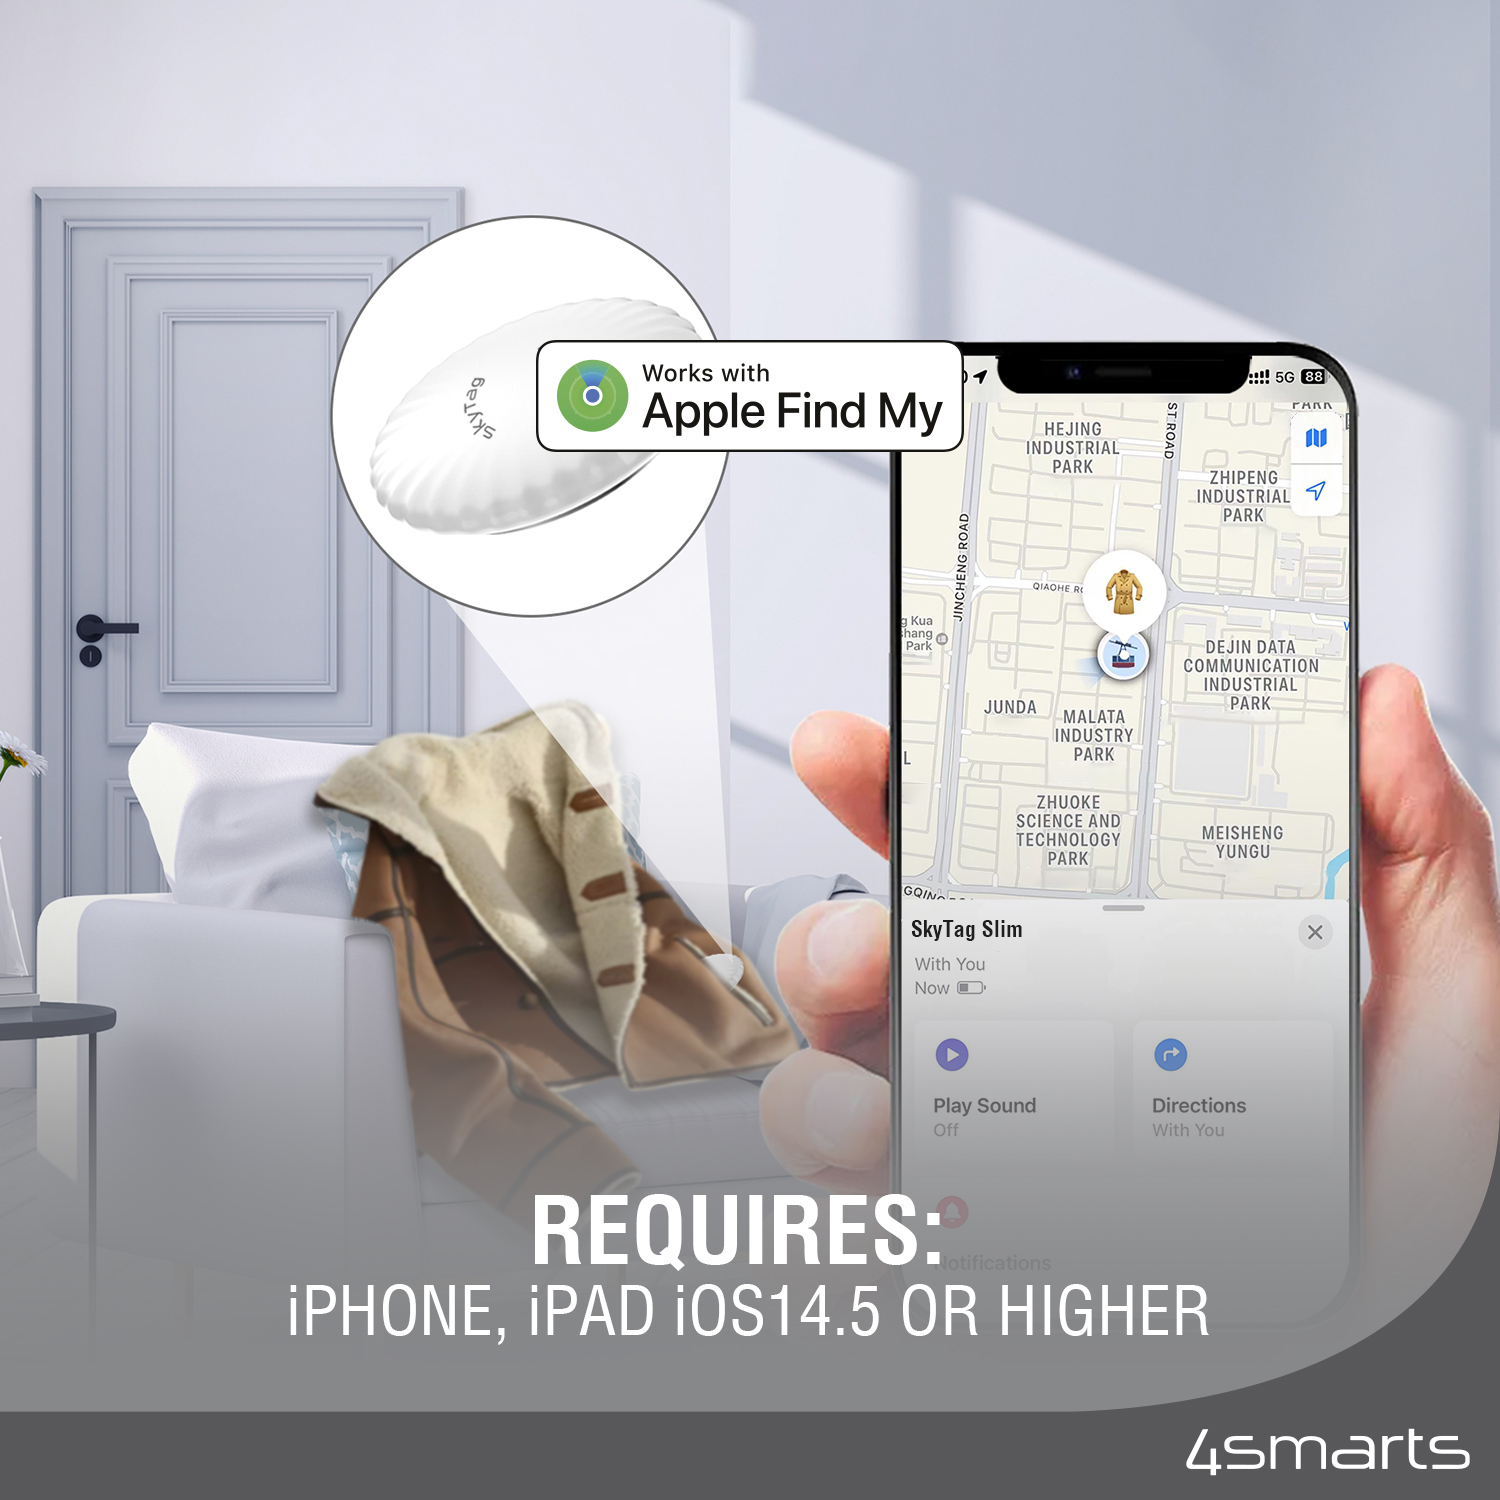 To be able to use the full range of functions of the 4smarts location finder SkyTag Slim, only an iPhone or iPad with iOS 14.5 or newer is required. 